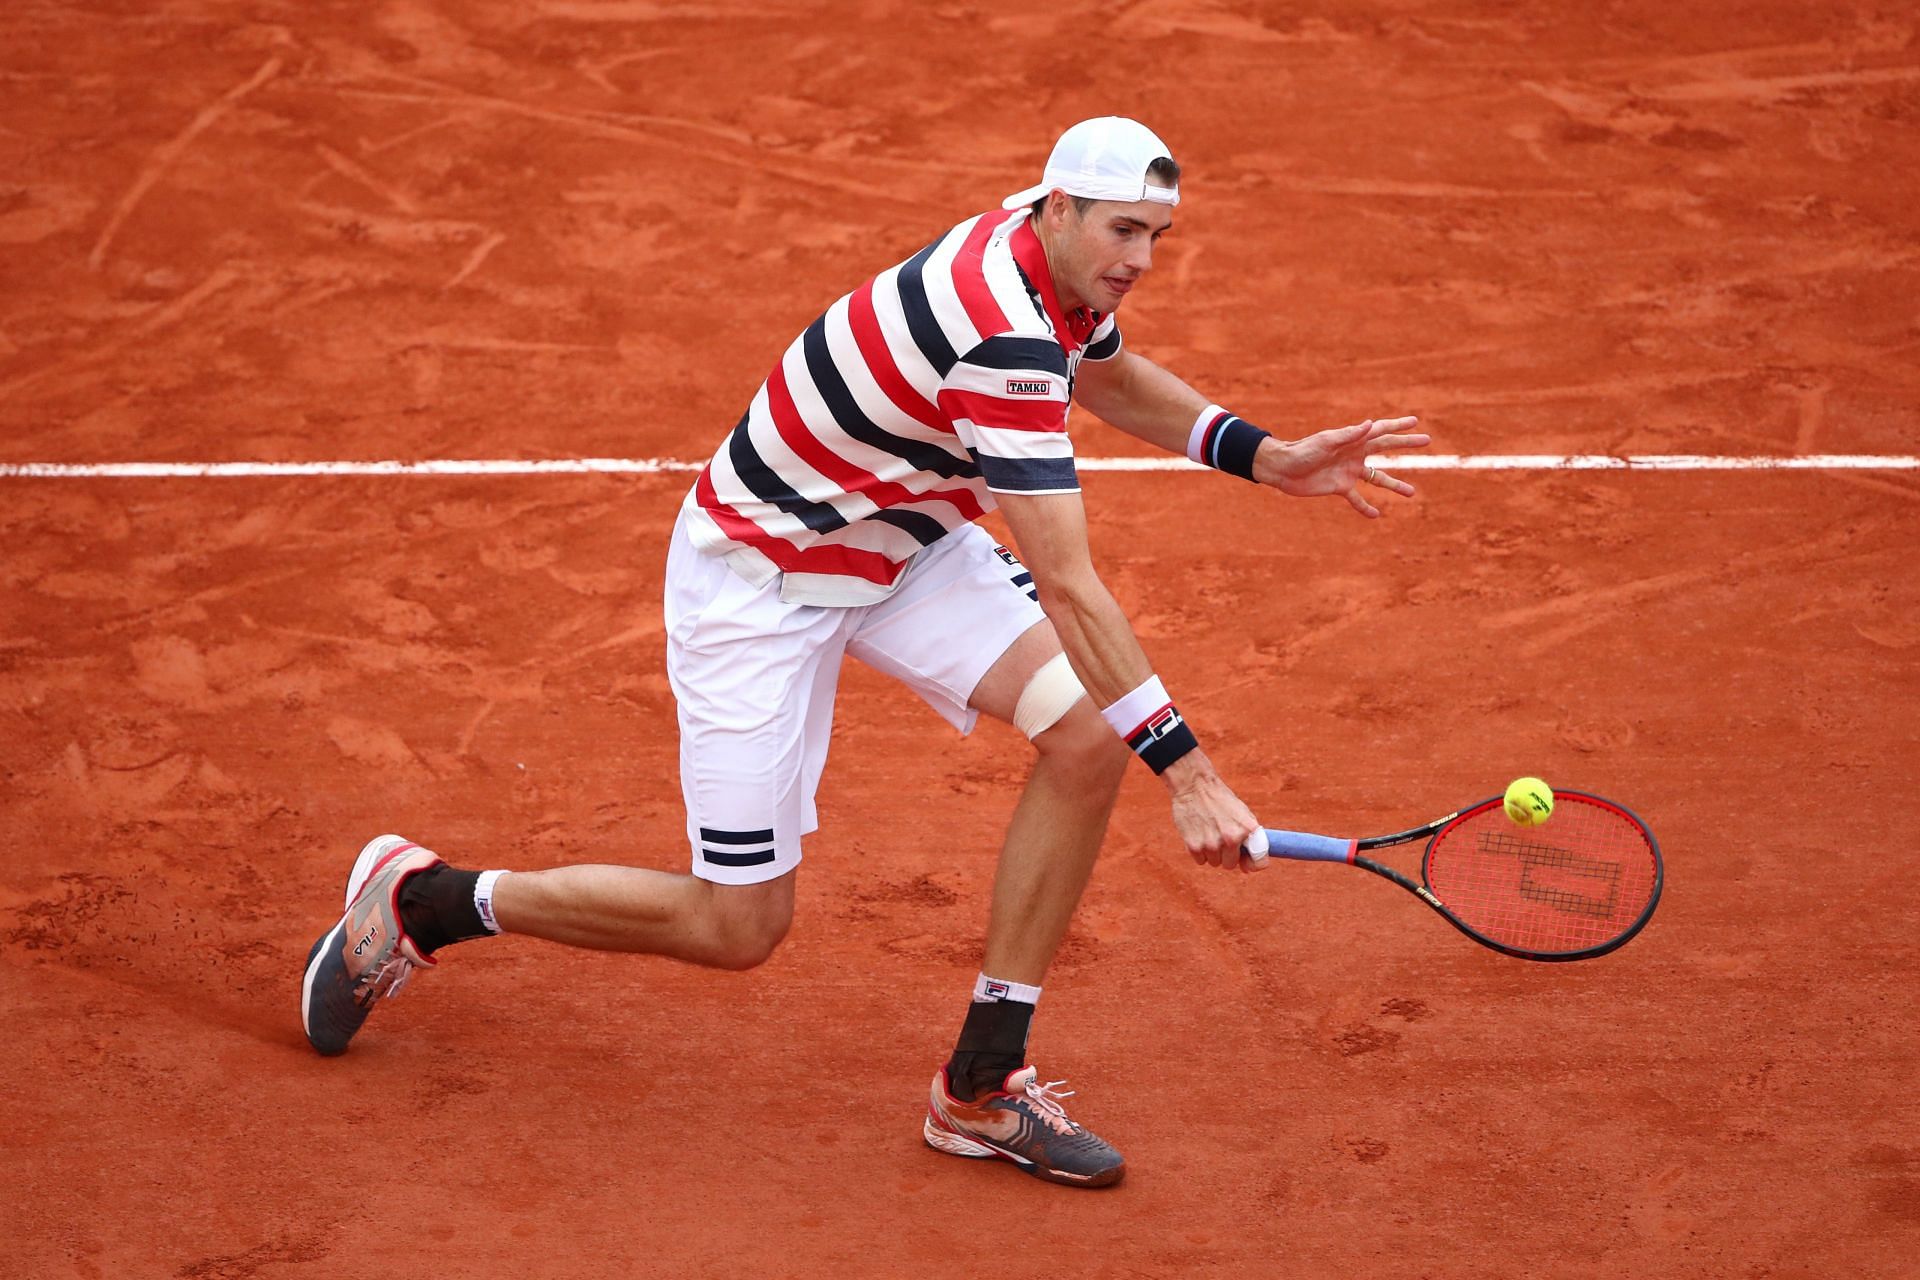 John Isner at the 2018 French Open